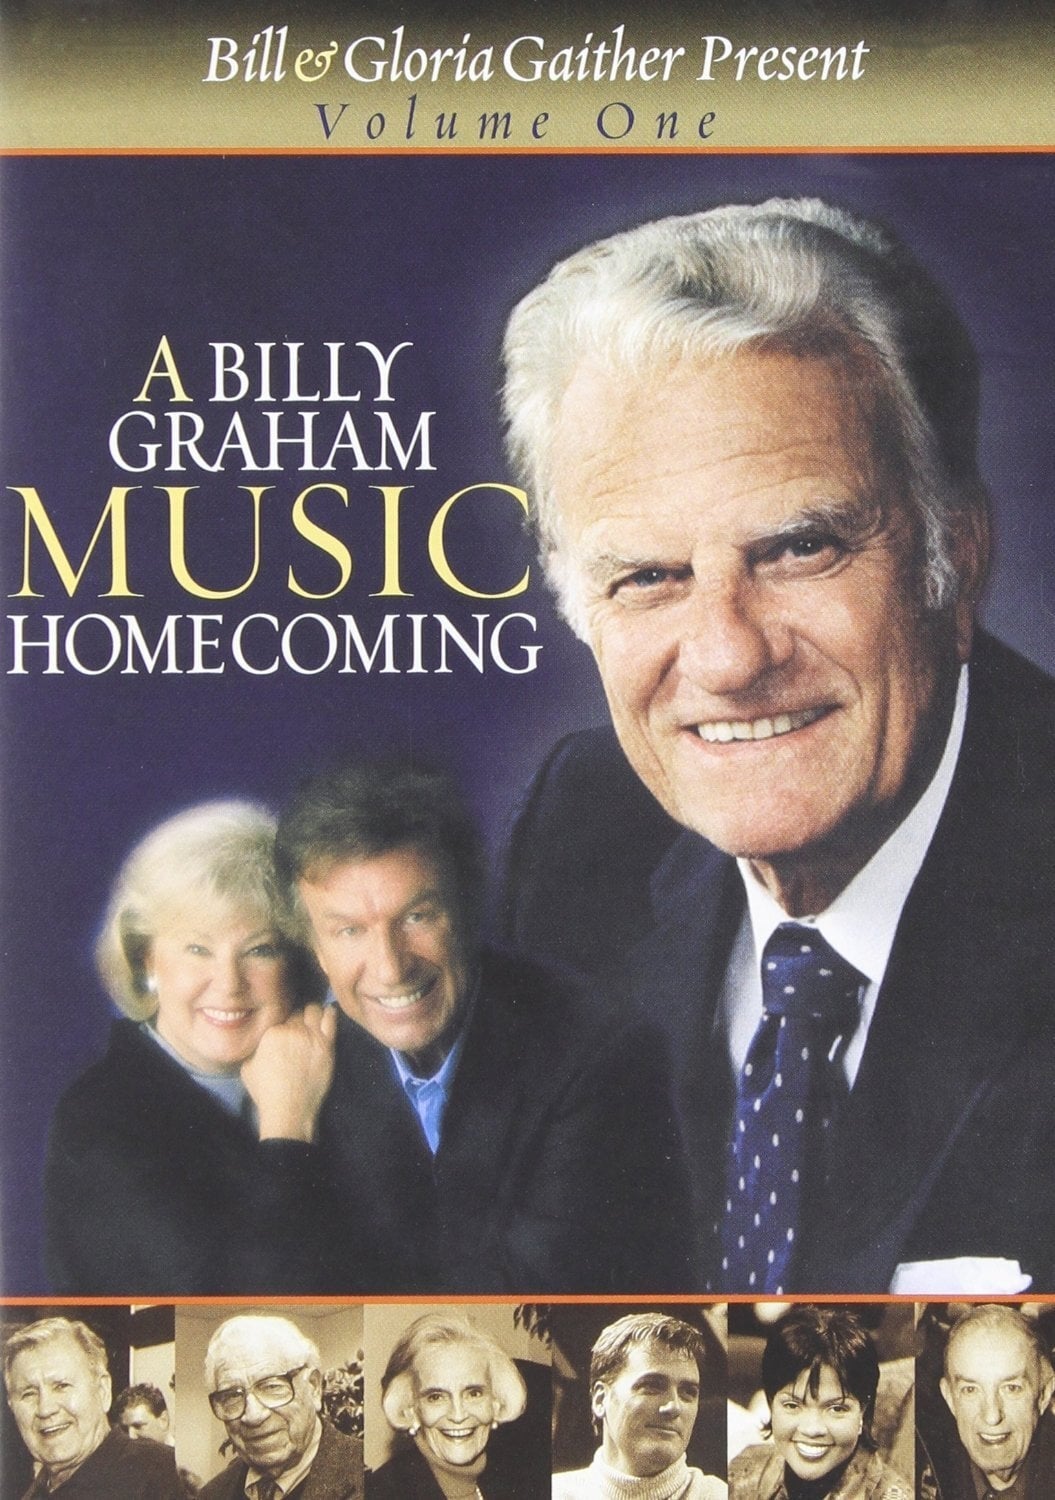 A Billy Graham Music Homecoming Volume 1